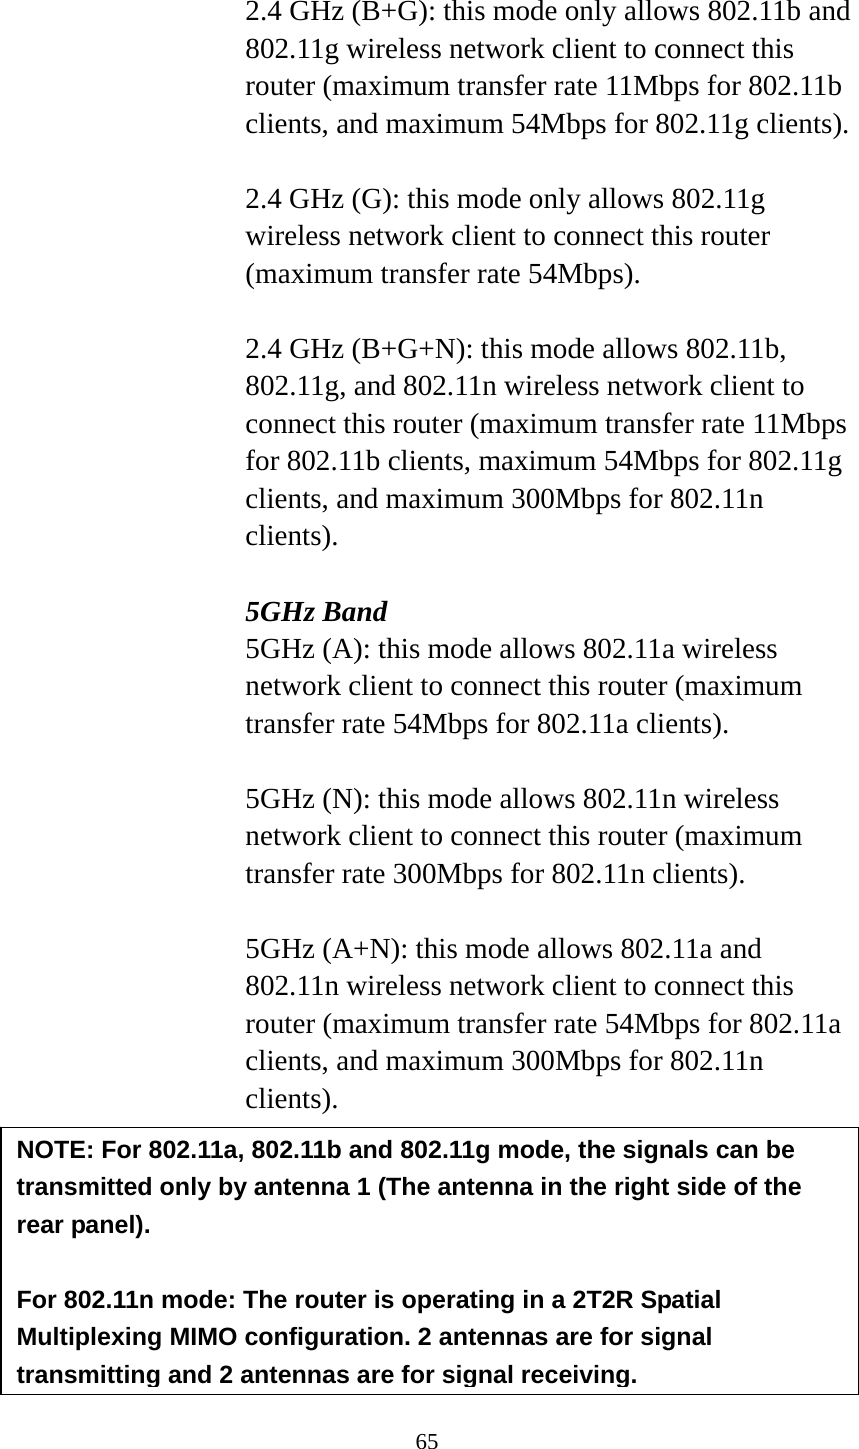 65  2.4 GHz (B+G): this mode only allows 802.11b and 802.11g wireless network client to connect this router (maximum transfer rate 11Mbps for 802.11b clients, and maximum 54Mbps for 802.11g clients).  2.4 GHz (G): this mode only allows 802.11g wireless network client to connect this router (maximum transfer rate 54Mbps).  2.4 GHz (B+G+N): this mode allows 802.11b, 802.11g, and 802.11n wireless network client to connect this router (maximum transfer rate 11Mbps for 802.11b clients, maximum 54Mbps for 802.11g clients, and maximum 300Mbps for 802.11n clients).  5GHz Band 5GHz (A): this mode allows 802.11a wireless network client to connect this router (maximum transfer rate 54Mbps for 802.11a clients).  5GHz (N): this mode allows 802.11n wireless network client to connect this router (maximum transfer rate 300Mbps for 802.11n clients).  5GHz (A+N): this mode allows 802.11a and 802.11n wireless network client to connect this router (maximum transfer rate 54Mbps for 802.11a clients, and maximum 300Mbps for 802.11n clients).        NOTE: For 802.11a, 802.11b and 802.11g mode, the signals can be transmitted only by antenna 1 (The antenna in the right side of the rear panel).    For 802.11n mode: The router is operating in a 2T2R Spatial Multiplexing MIMO configuration. 2 antennas are for signal transmitting and 2 antennas are for signal receiving.